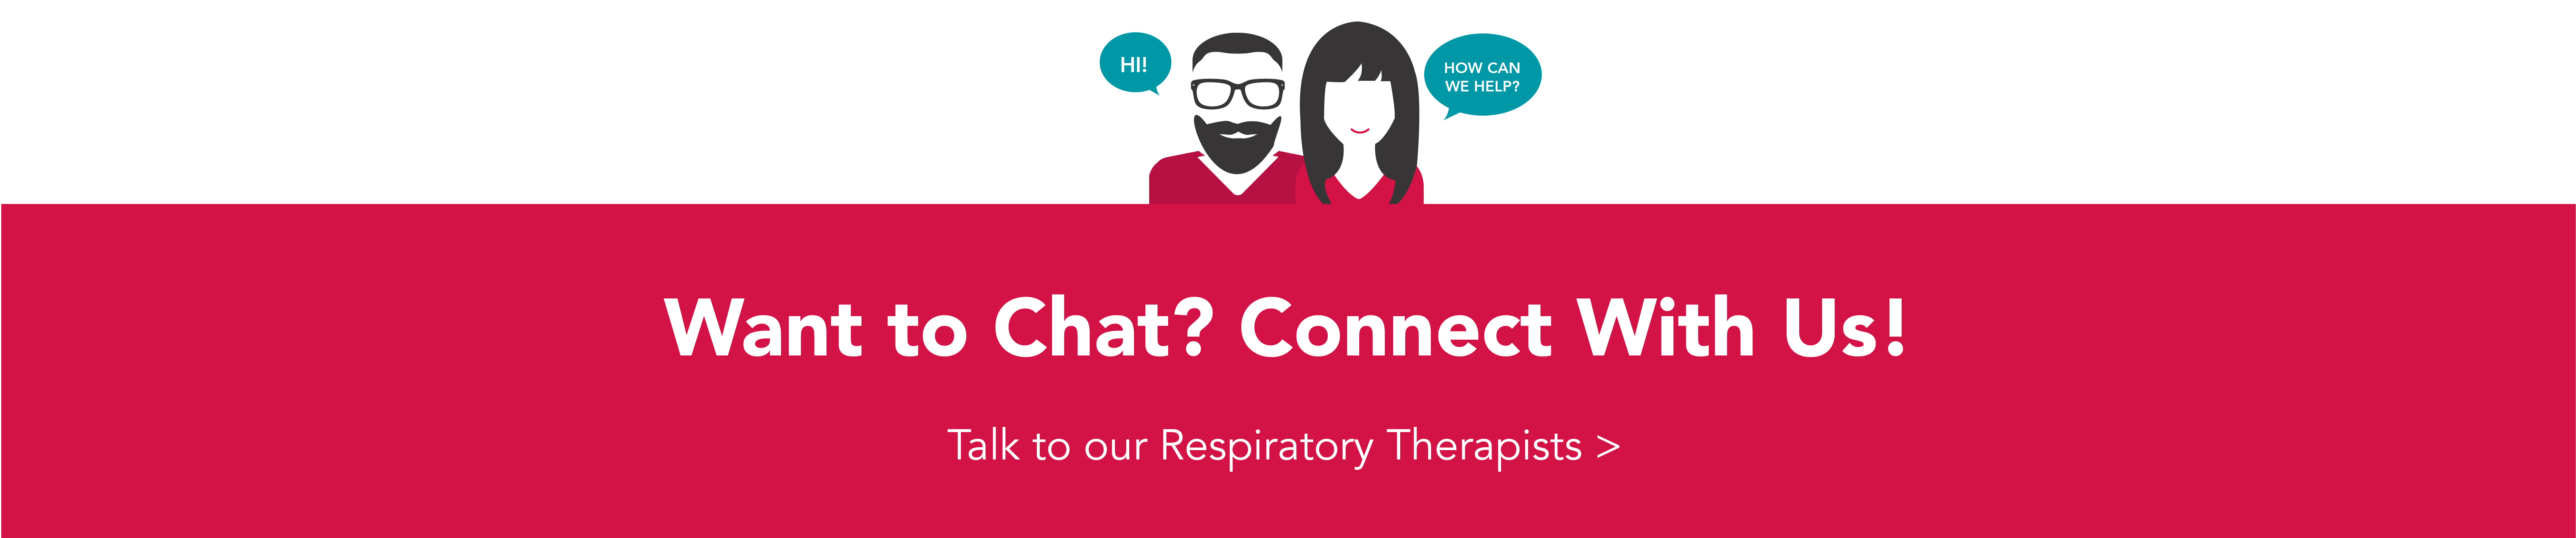 Want to chat? Connect with us! Talk to our respiratory therapists.